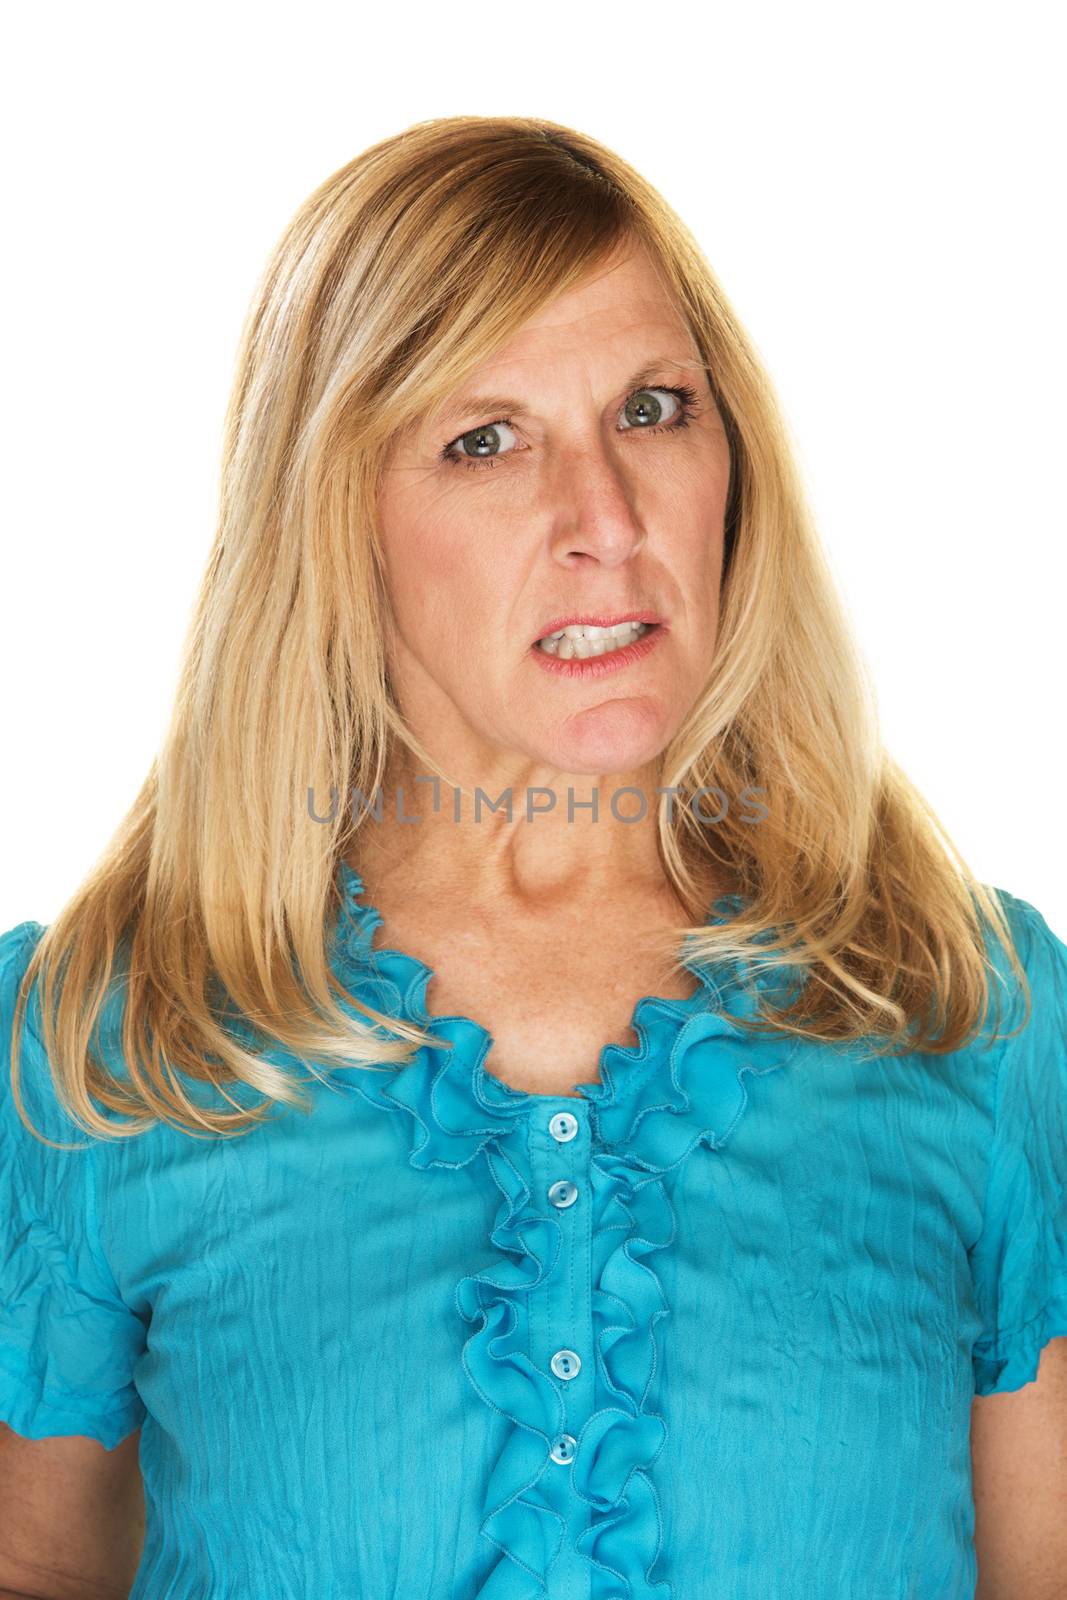 Annoyed lady in blue with clenched teeth